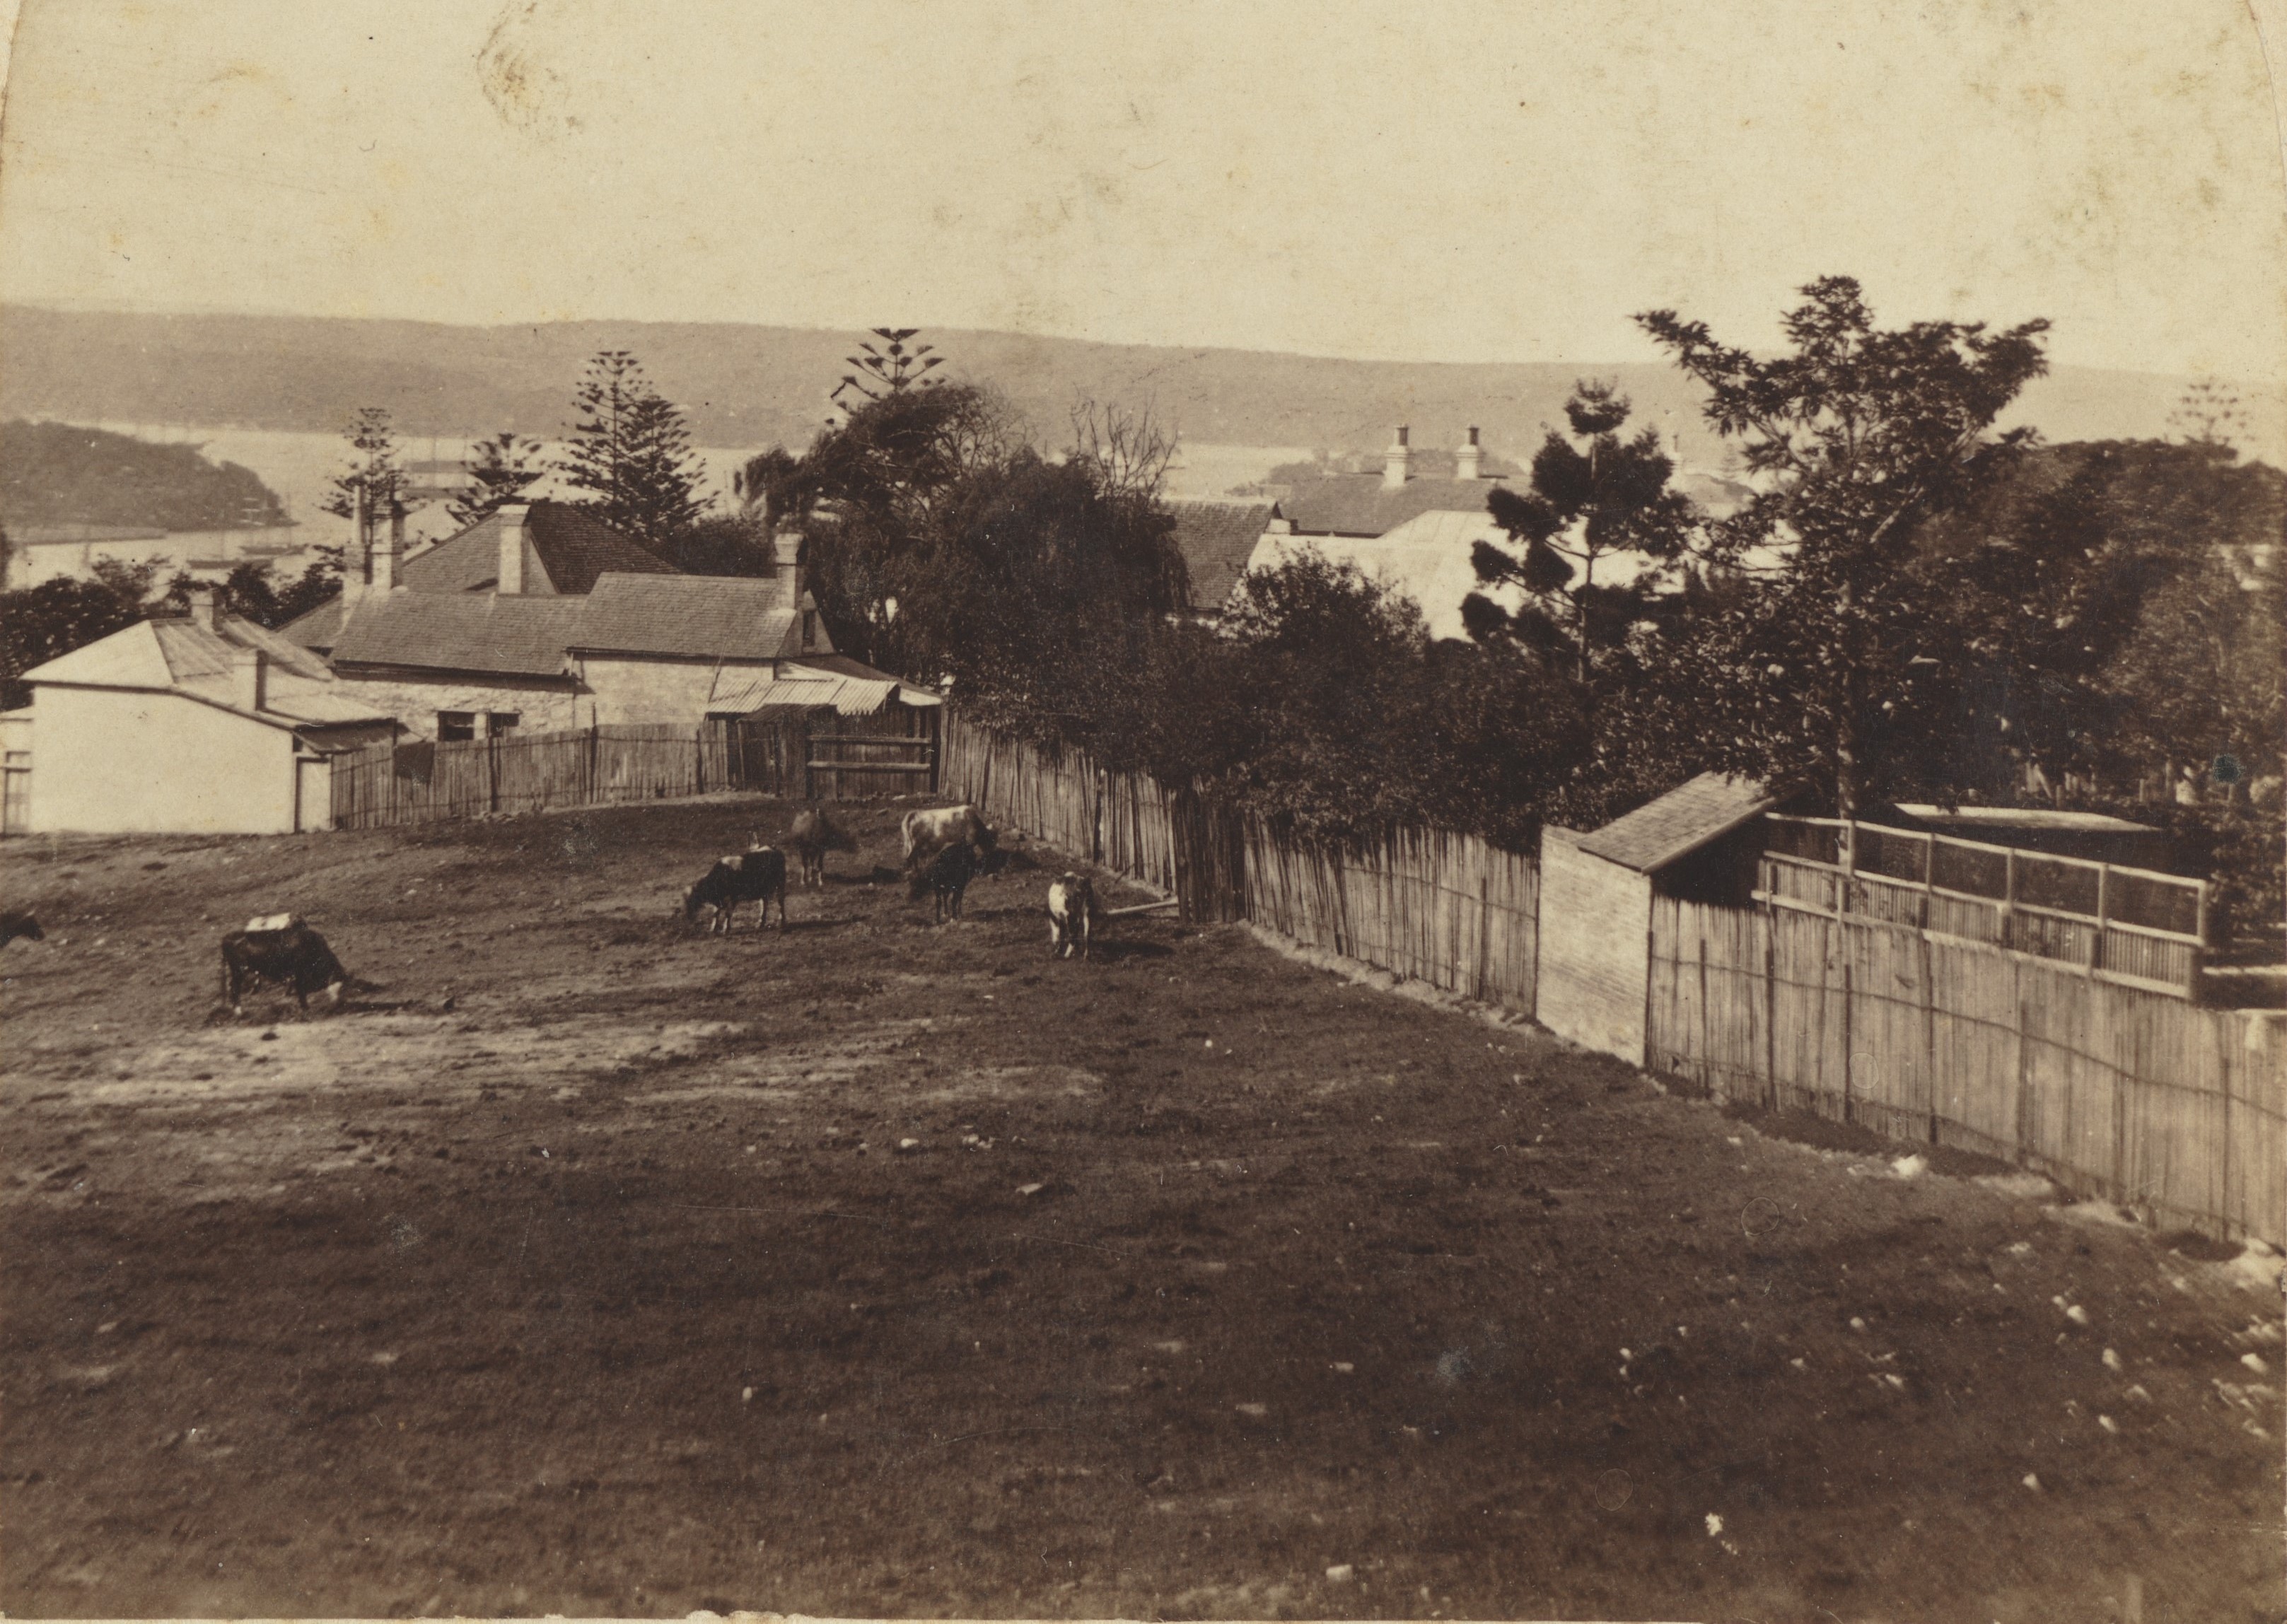 Photograph showing cattle grazing with Sydney Harbour in the background